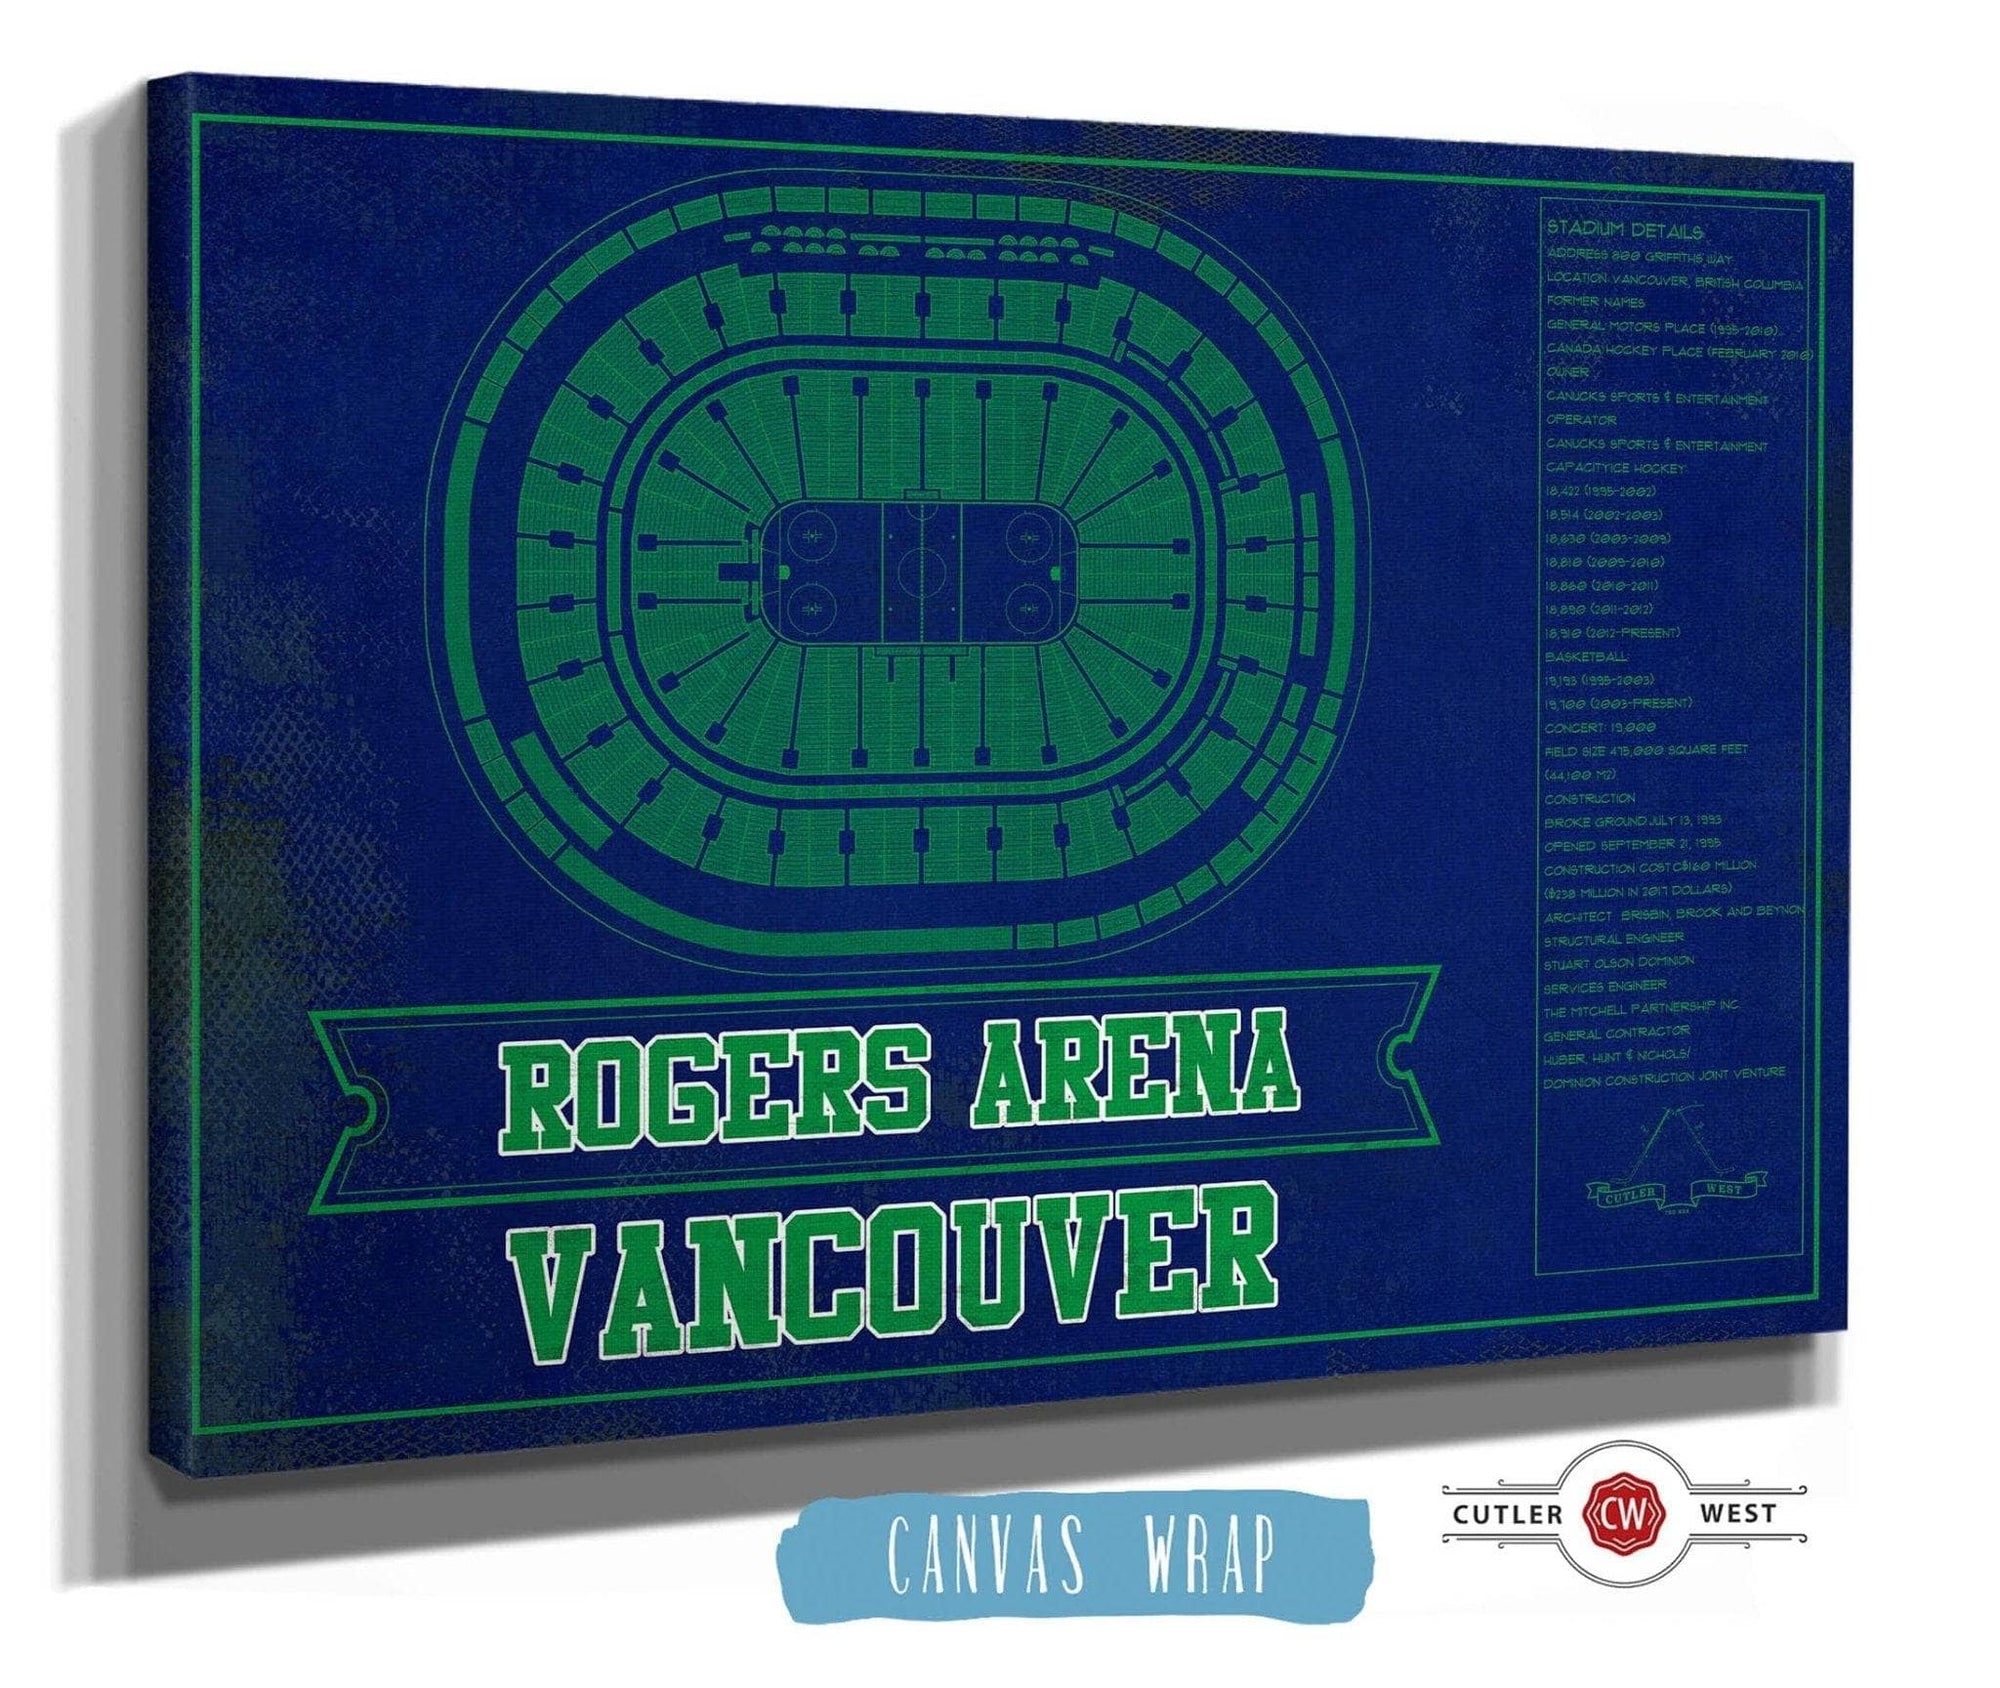 Cutler West 14" x 11" / Stretched Canvas Wrap Vancouver Canucks Team Colors - Rogers Arena Vintage Hockey Blueprint NHL Print 673825395-TEAM